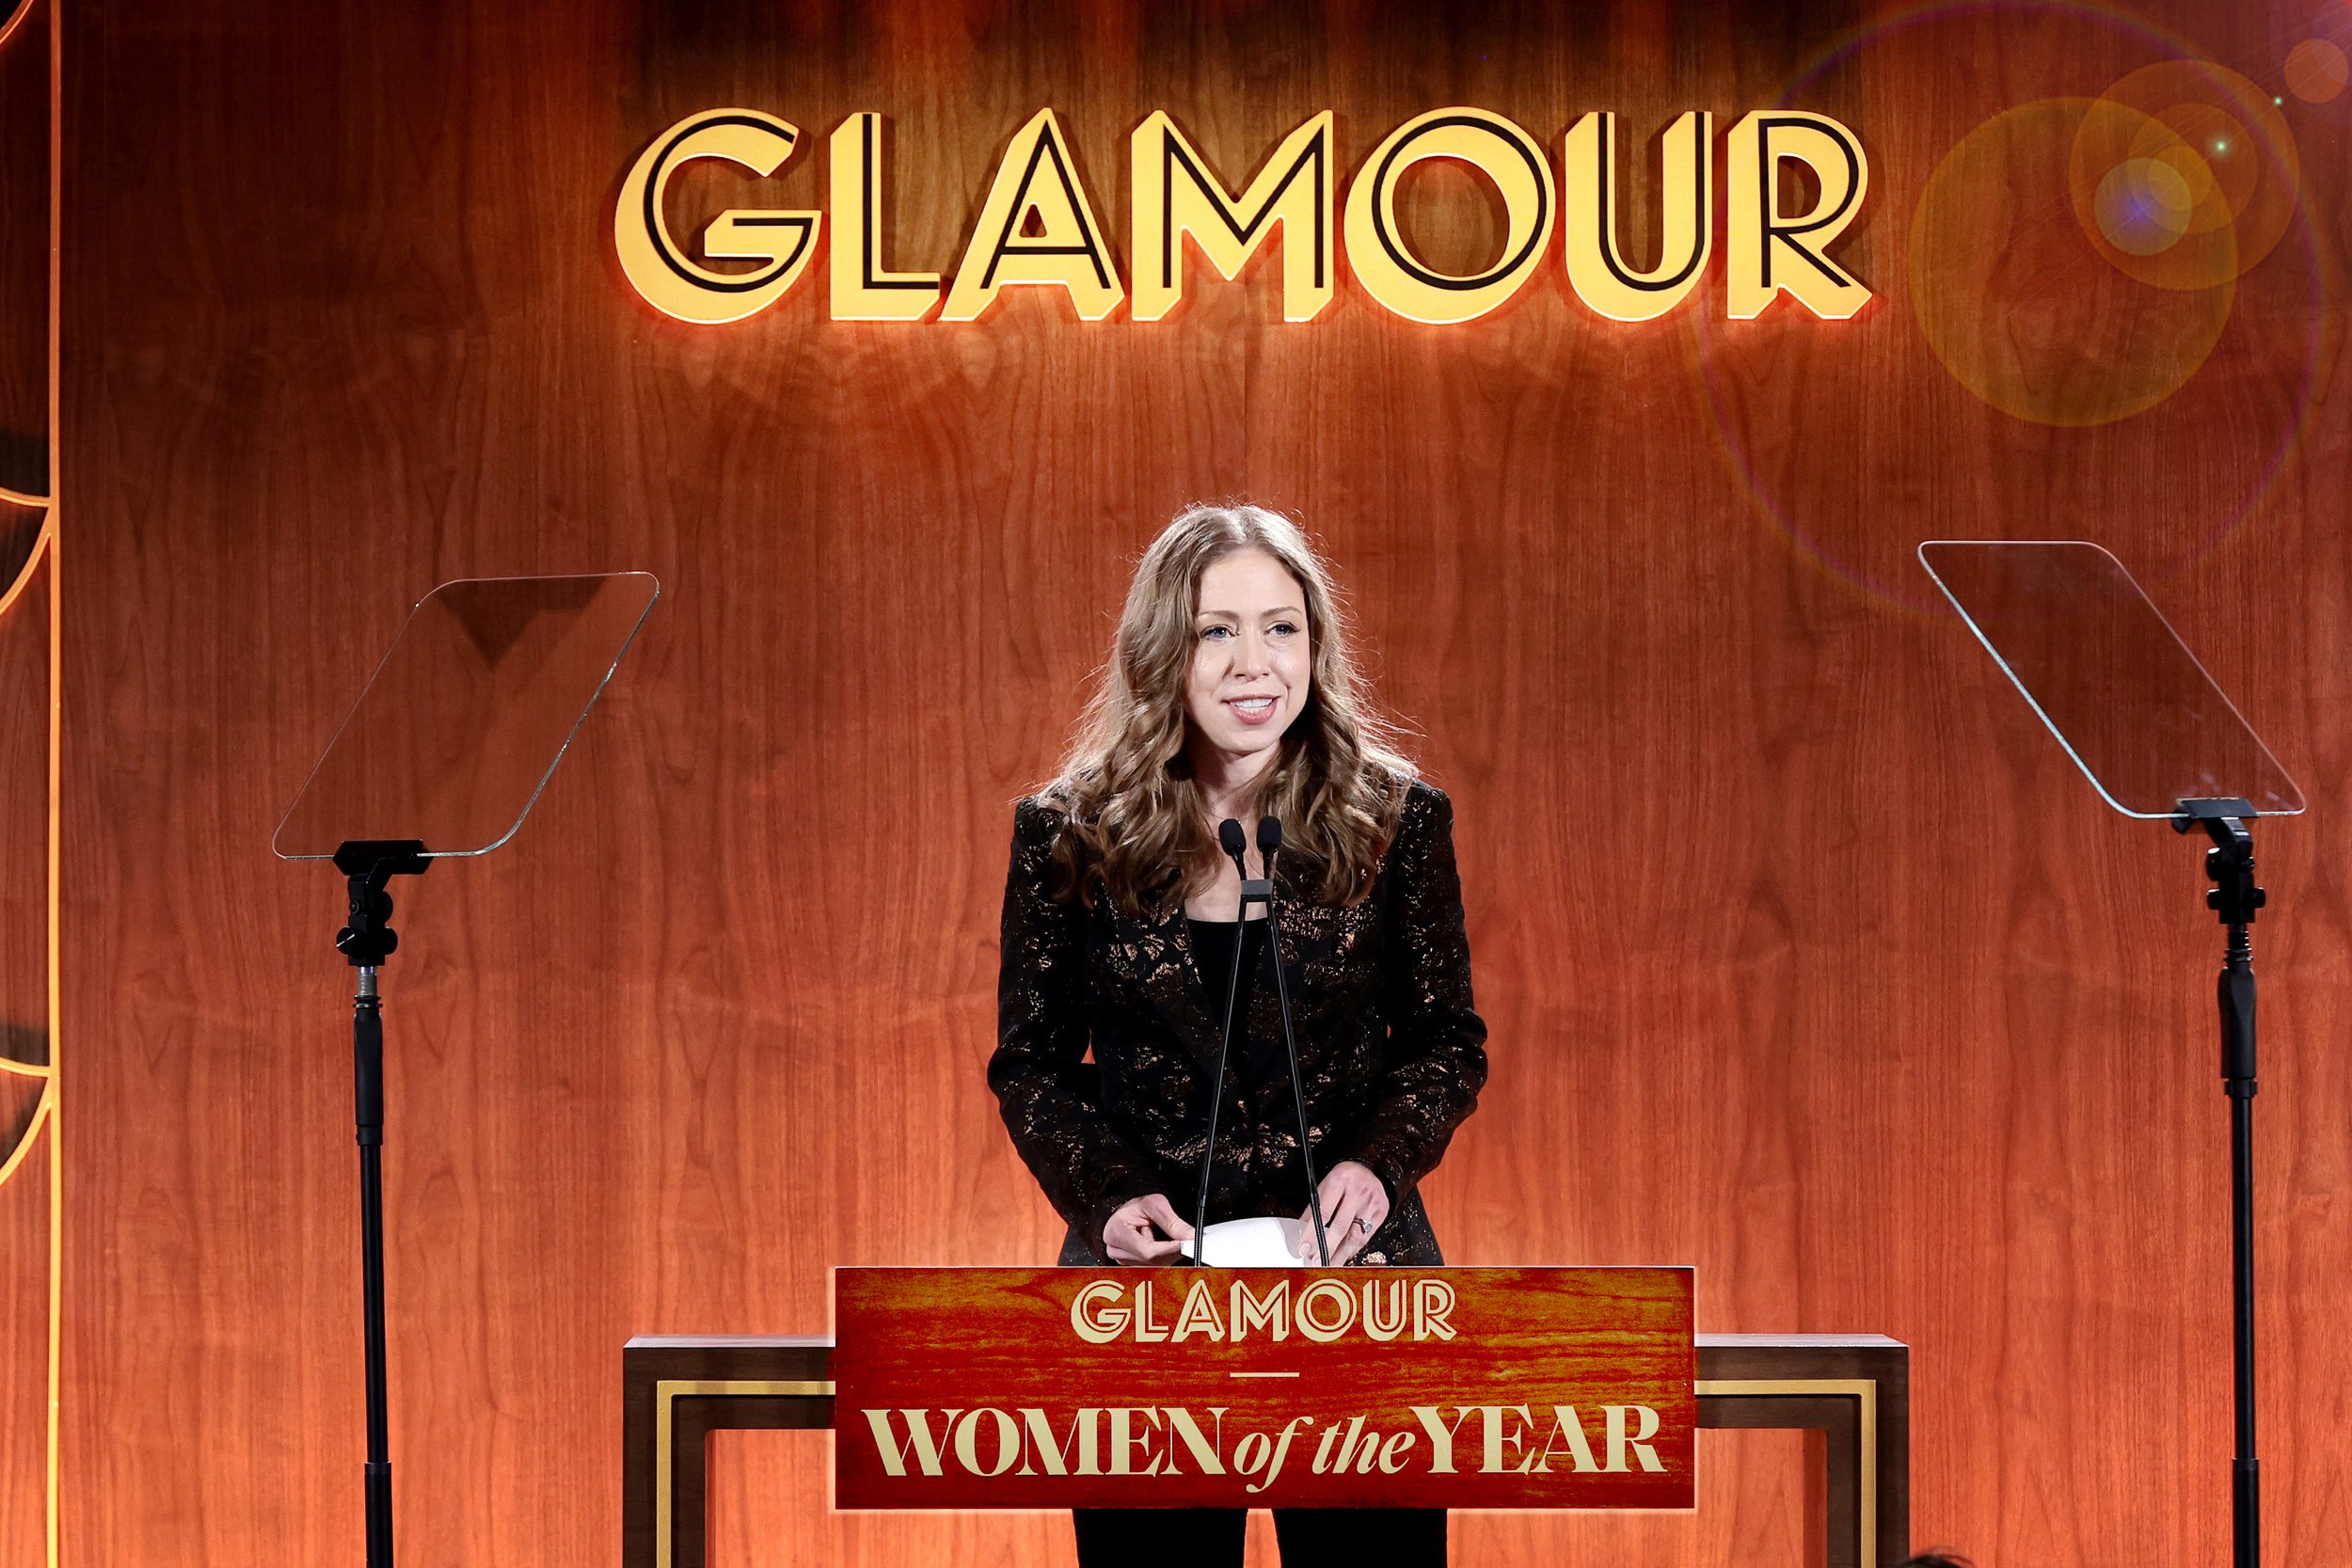 03_Chelsea Clinton presents Shannon Watts with her WOTY award. Photo by Getty Images for Glamour copy.jpg